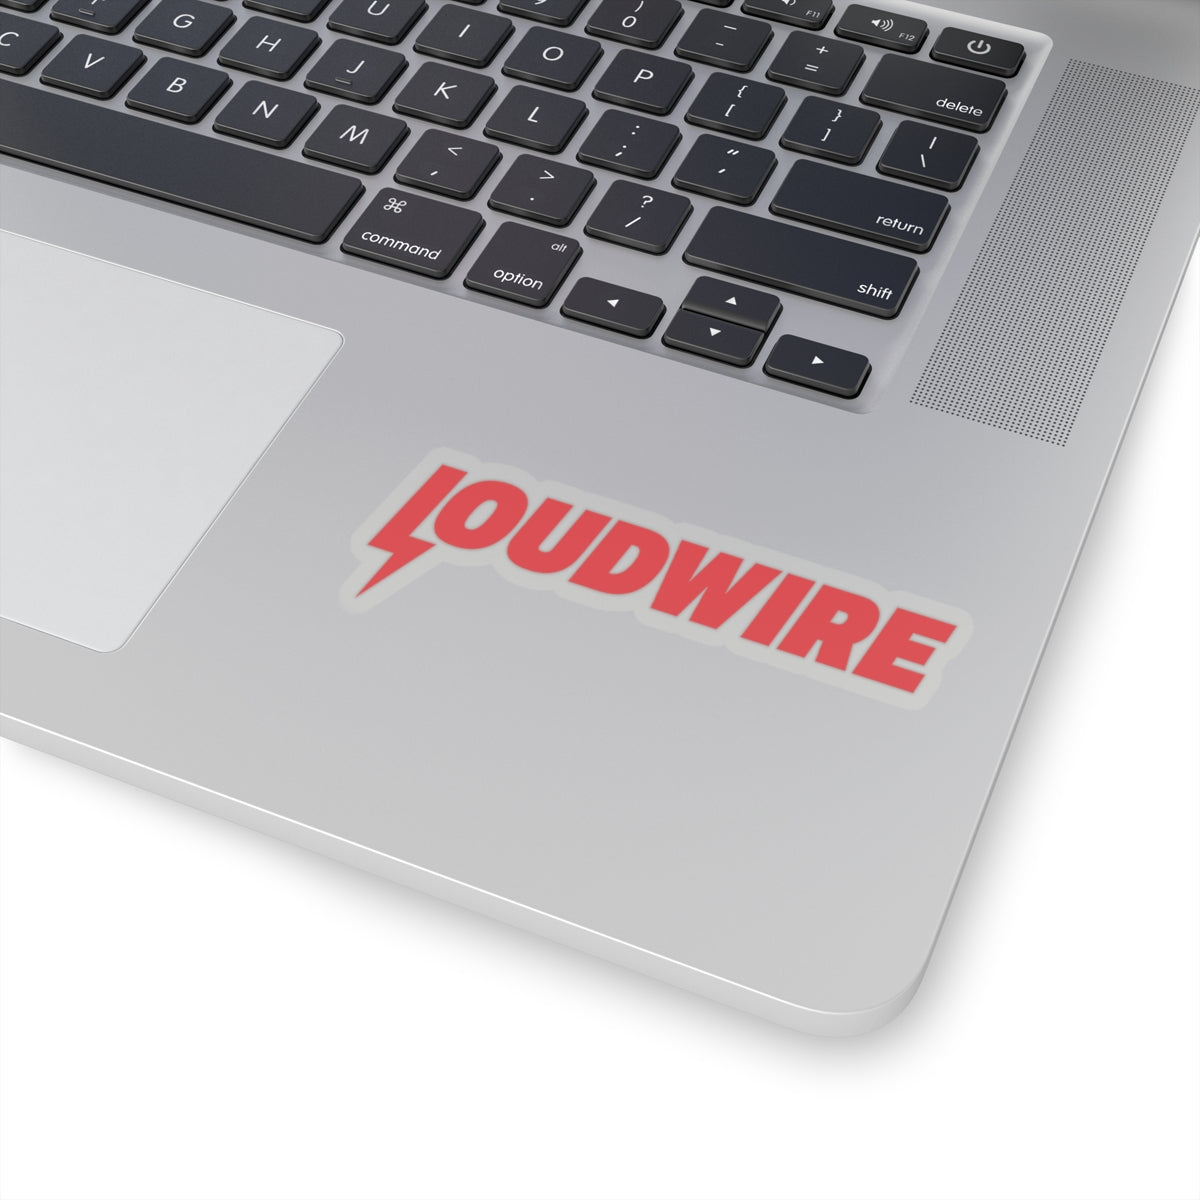 LOUDWIRE STICKERS